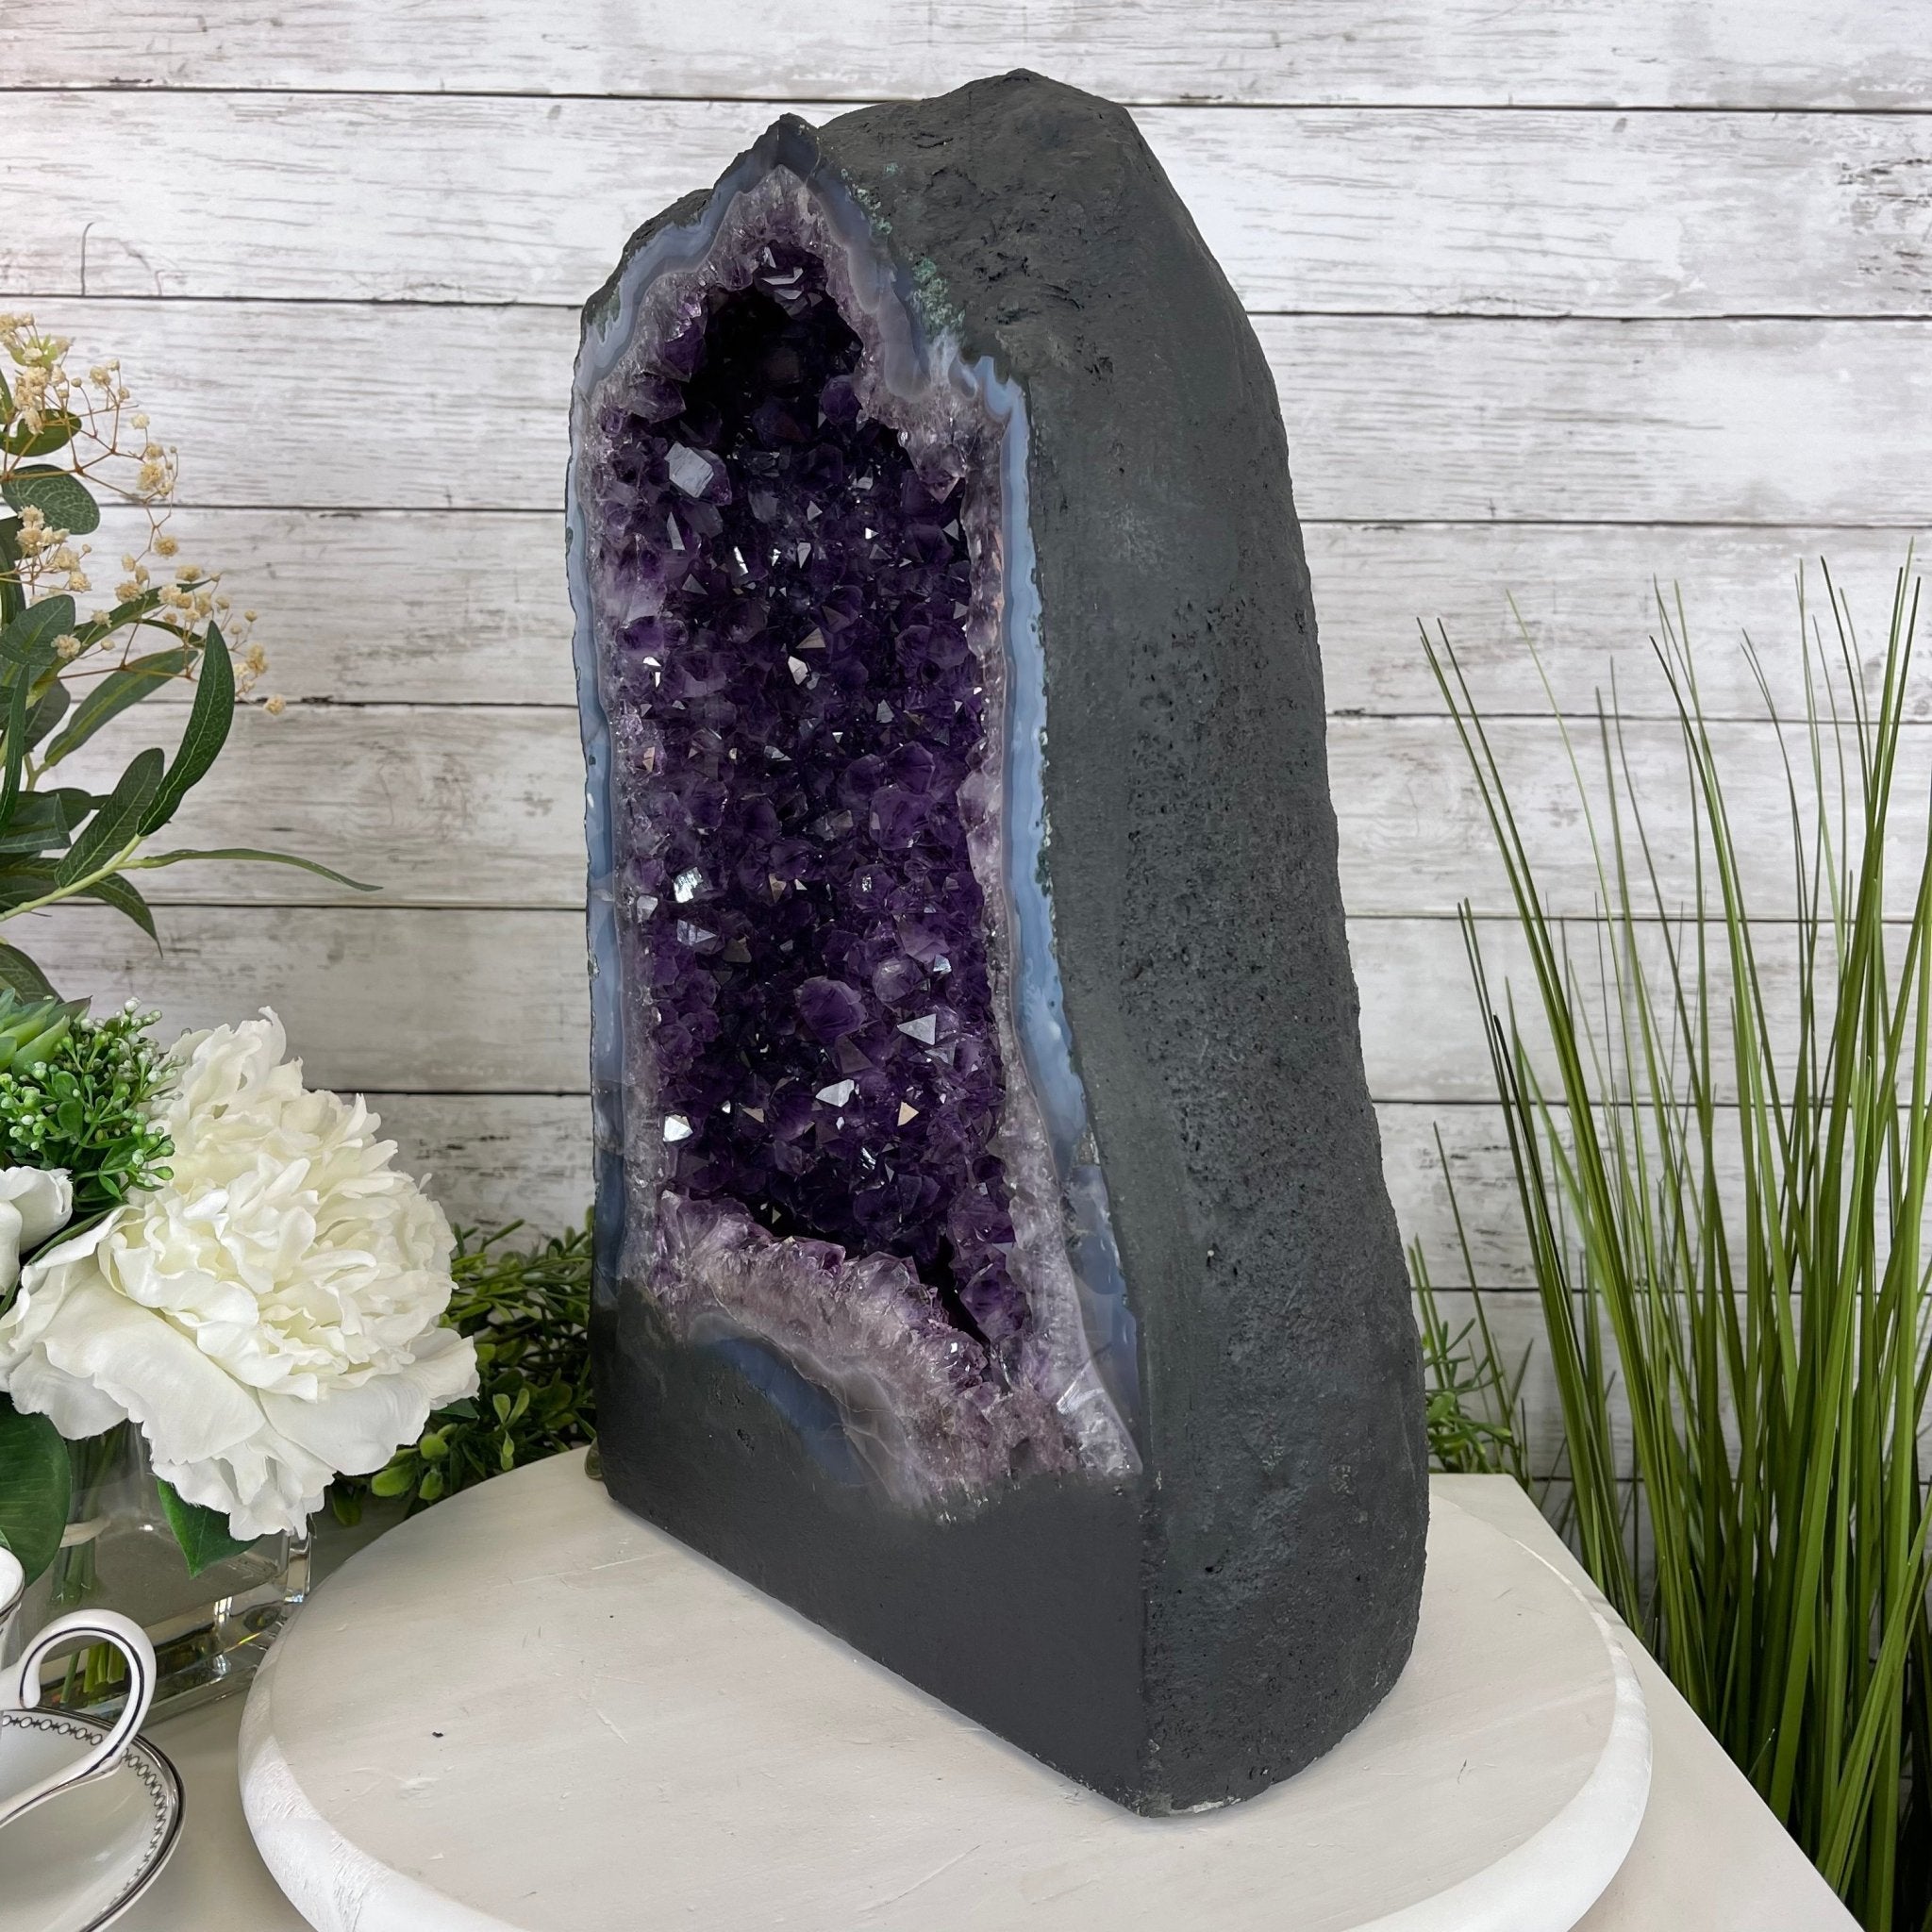 Extra Quality Brazilian Amethyst Cathedral, 48.4 lbs & 16.25" Tall #5601-0705 by Brazil Gems - Brazil GemsBrazil GemsExtra Quality Brazilian Amethyst Cathedral, 48.4 lbs & 16.25" Tall #5601-0705 by Brazil GemsCathedrals5601-0705